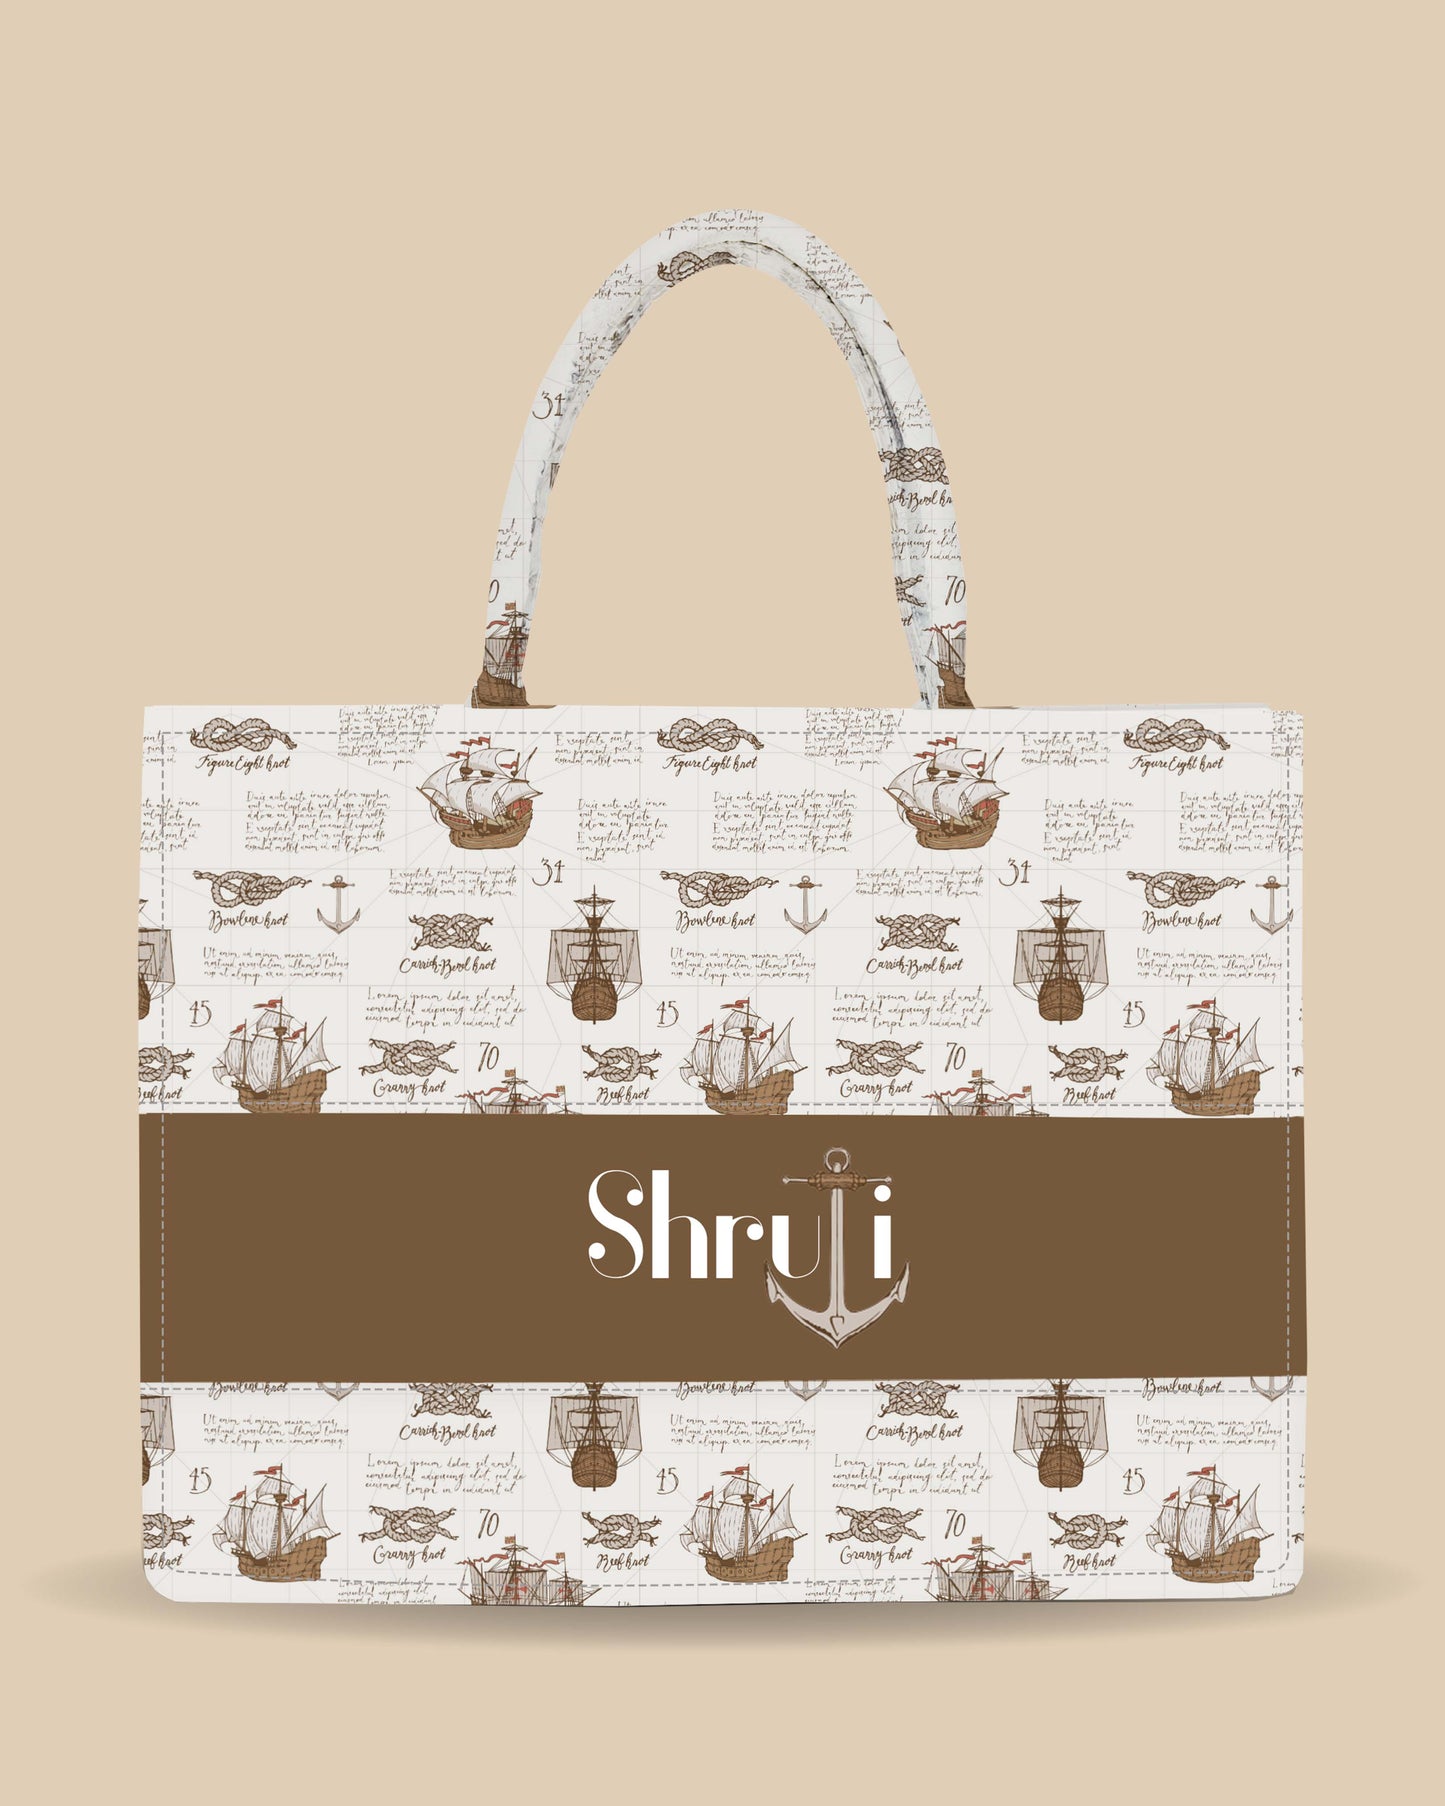 Customized Tote Bag Designed with Pirates Cruise Ships